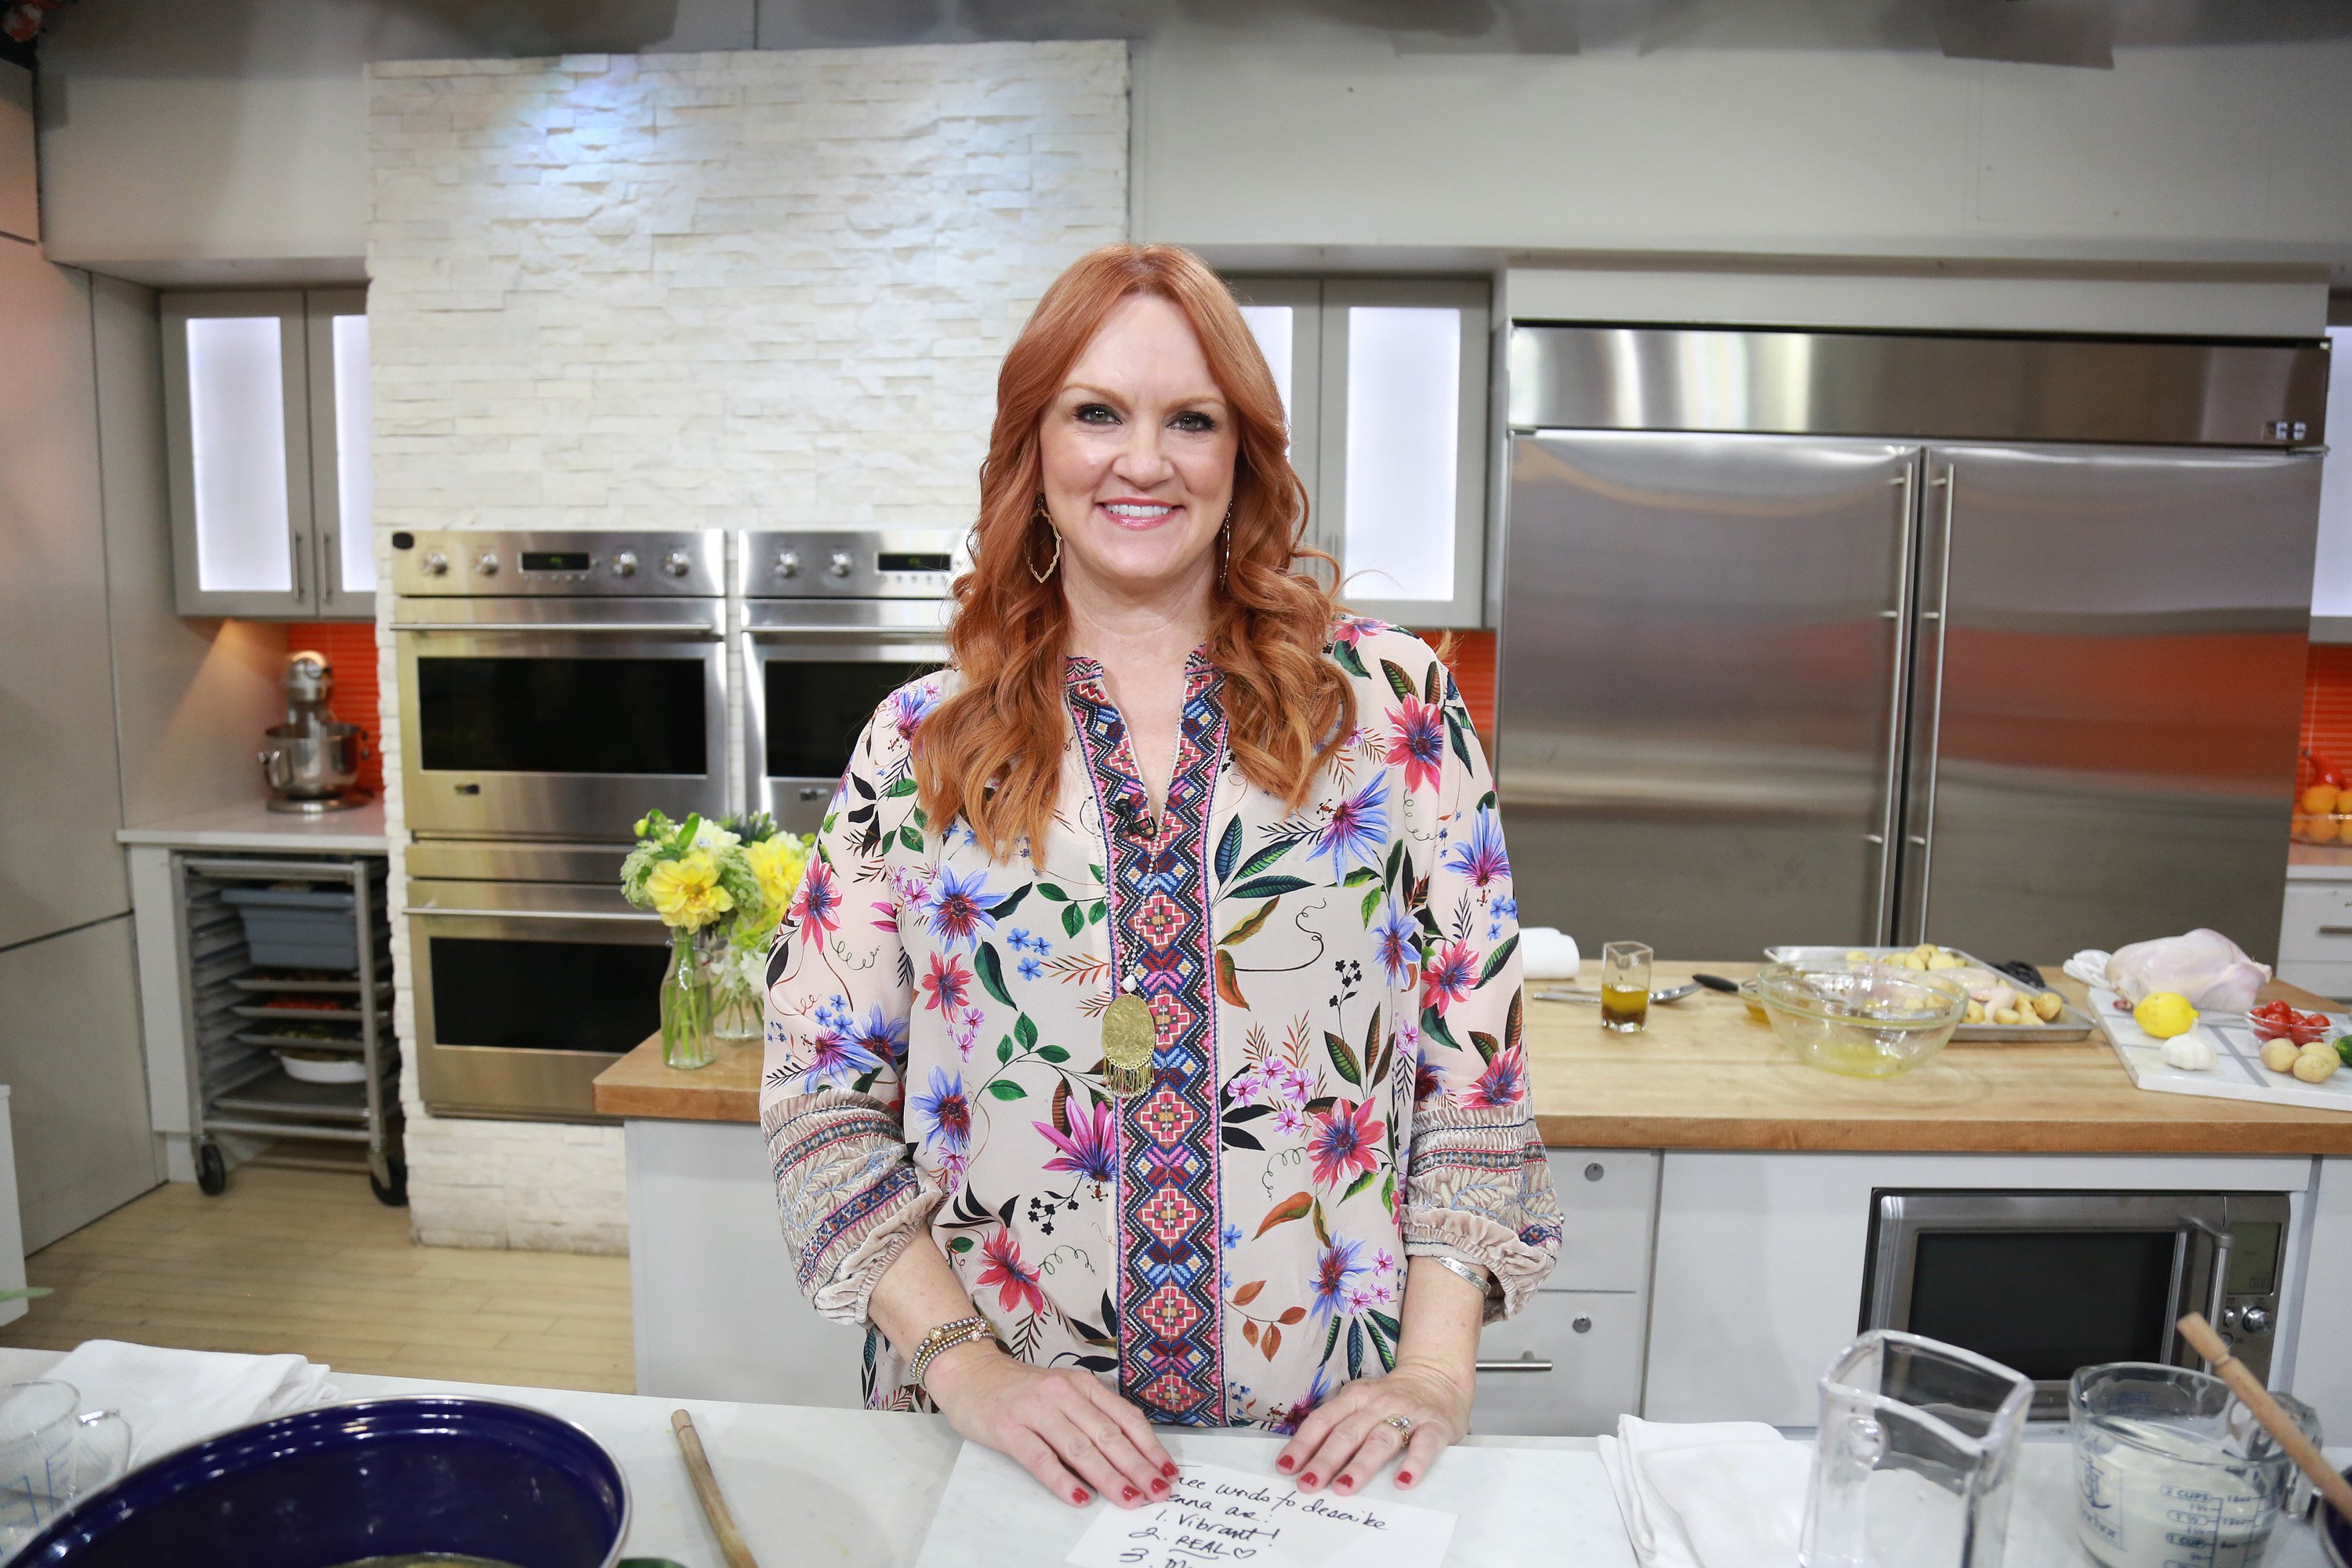 The Pioneer Woman Ree Drummond stands in the 'Today' show kitchen. 